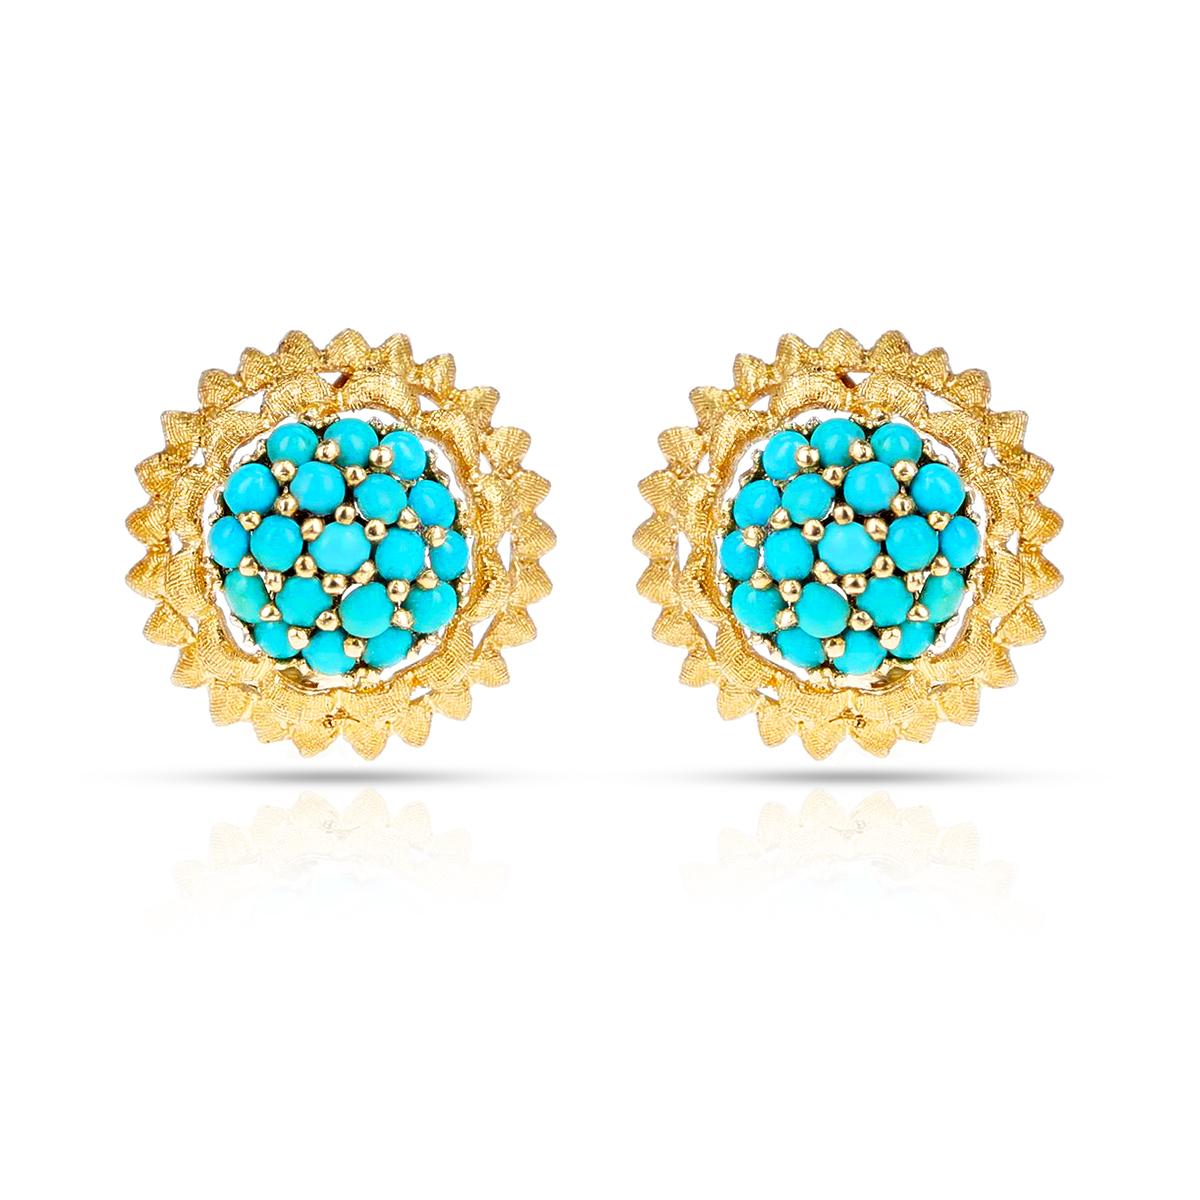 Floral Turquoise Cabochon Cluster Earrings, 14k In Excellent Condition For Sale In New York, NY